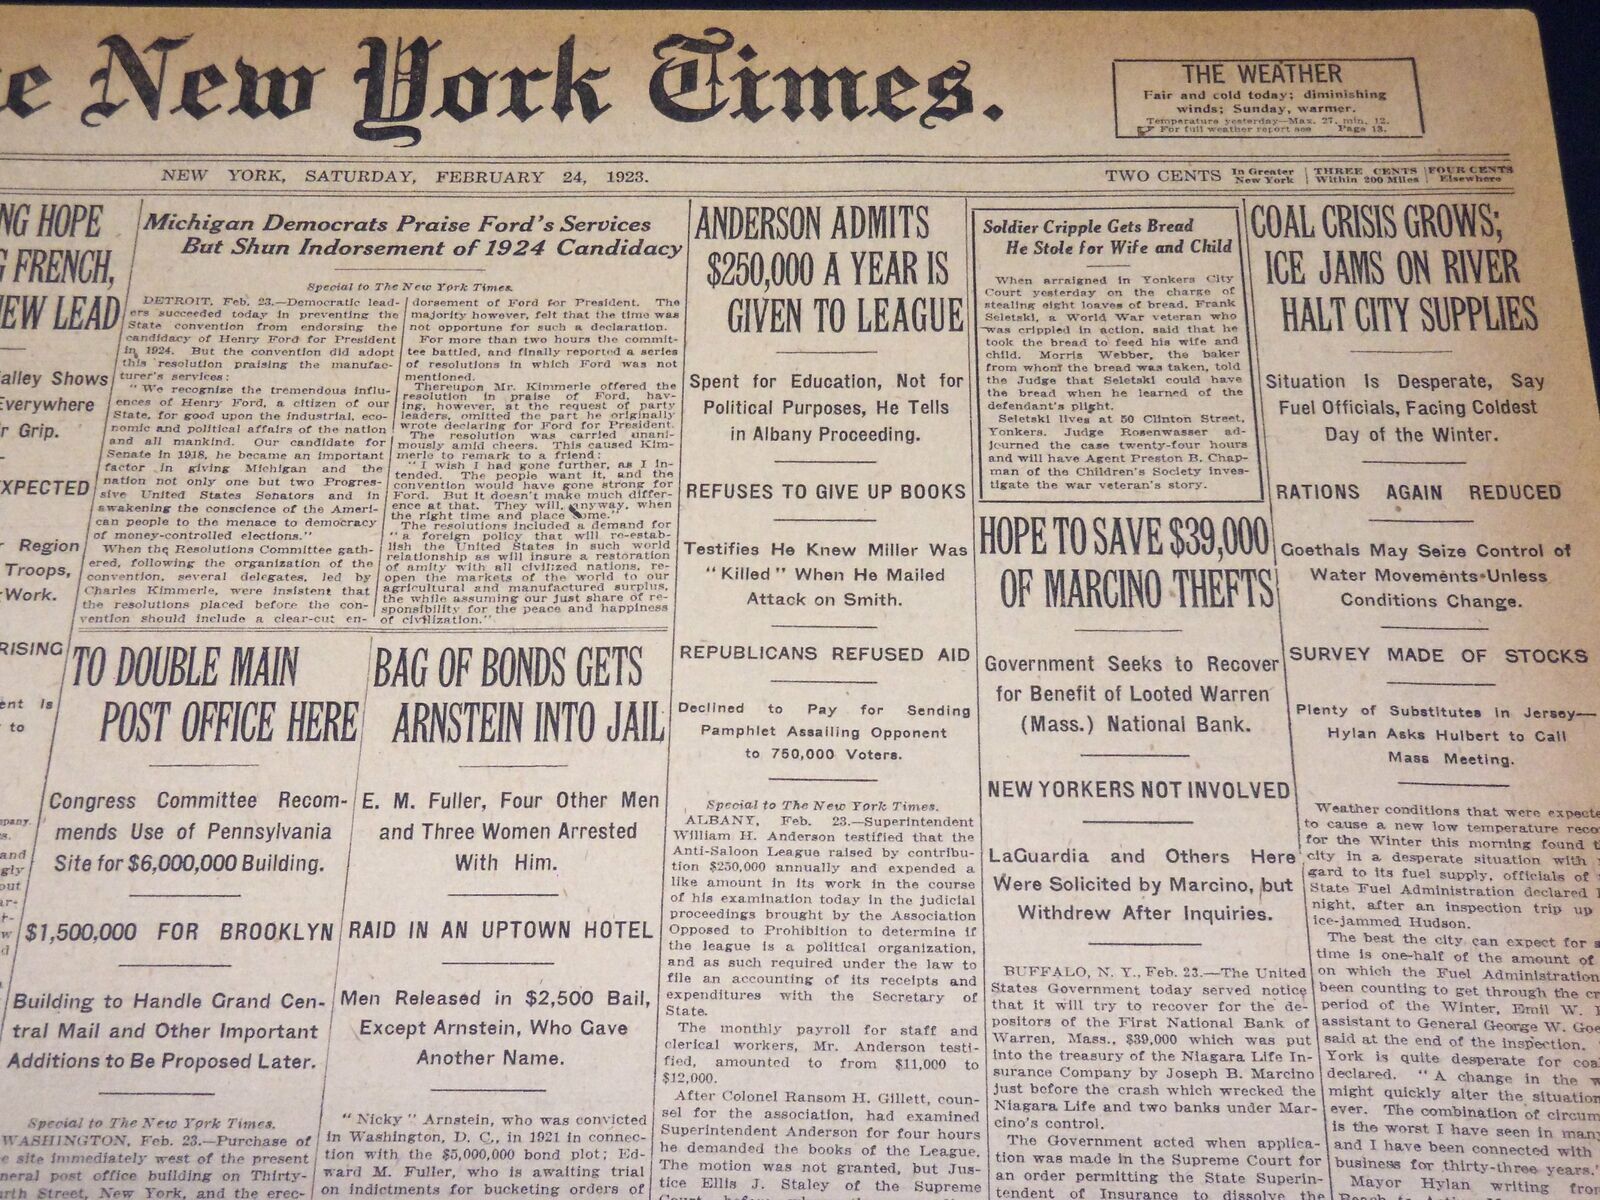 1923 FEBRUARY 24 NEW YORK TIMES - TO DOUBLE MAIN POST OFFICE HERE - NT 7992